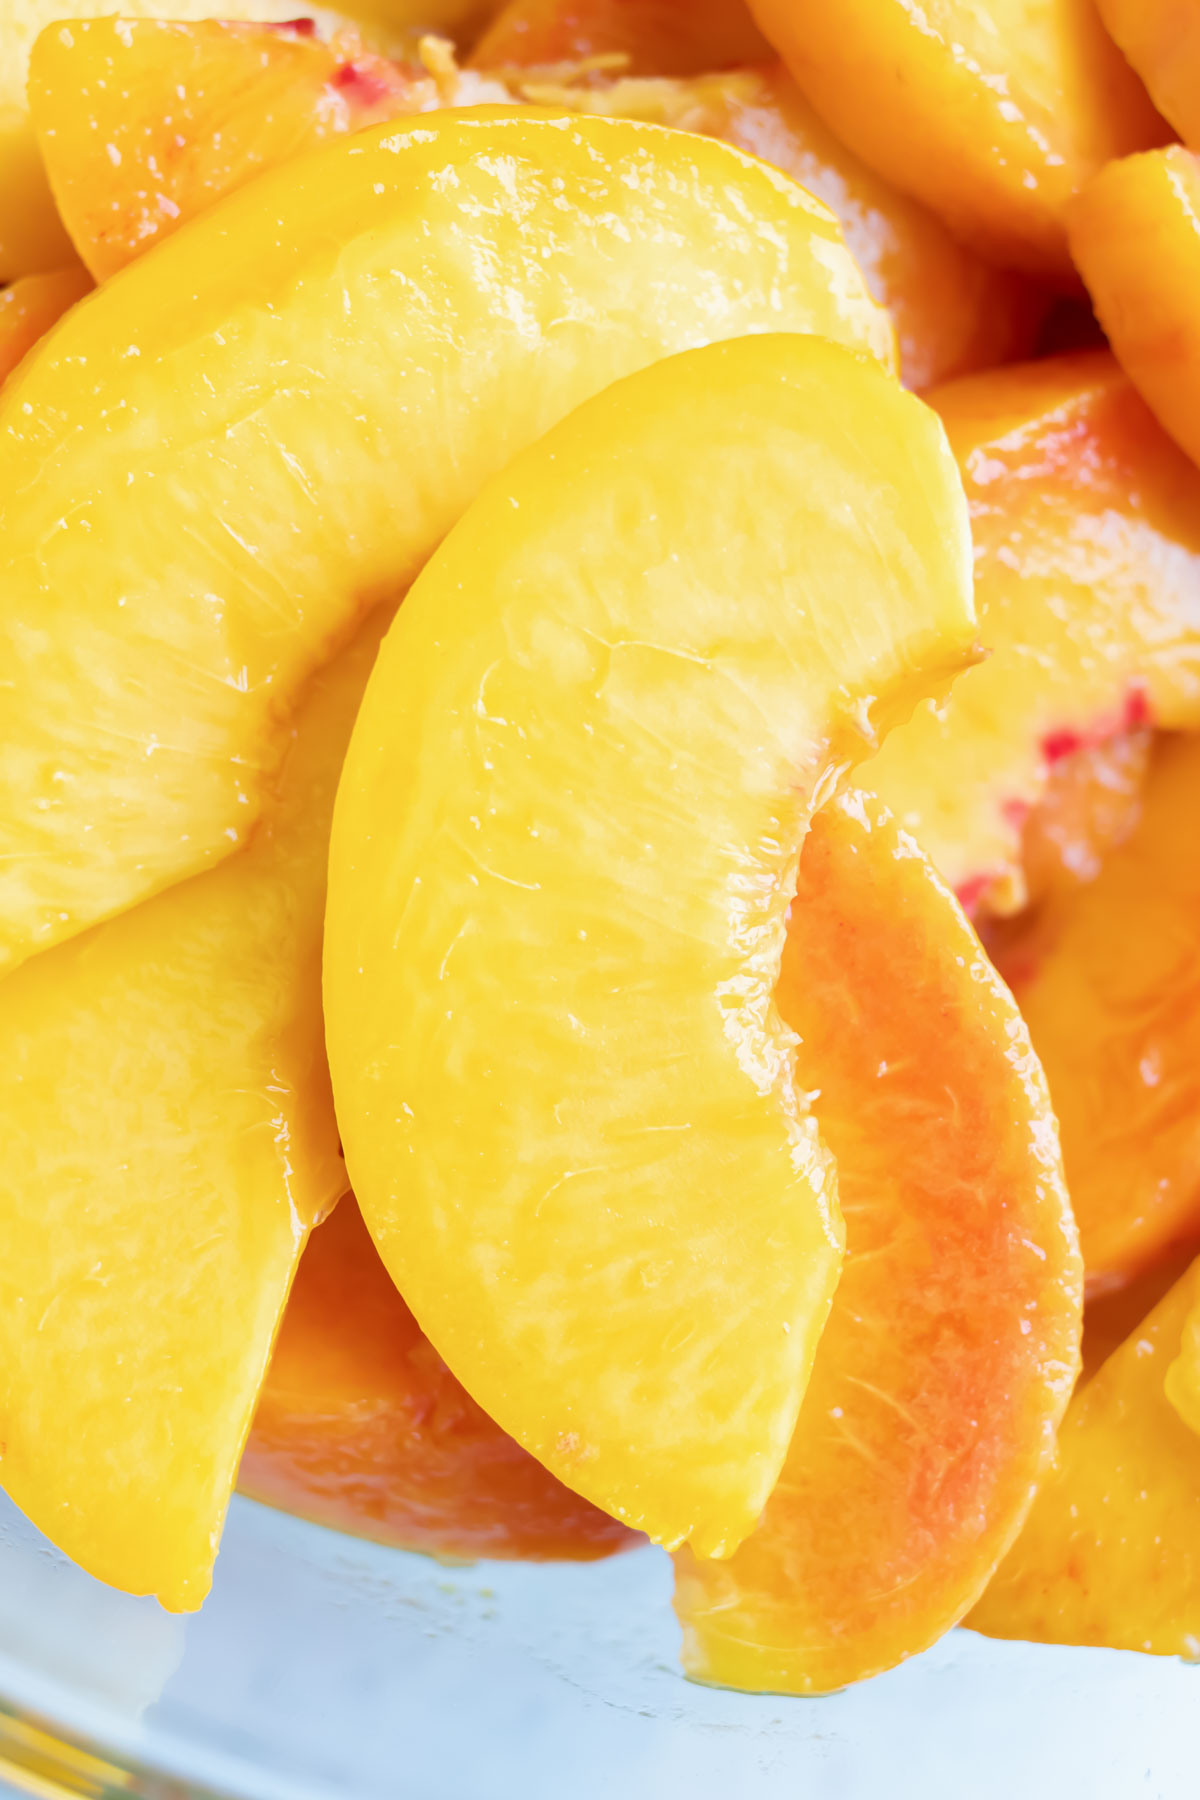 A close up picture of sliced and peeled ripe peaches about a half inch to an inch thick.